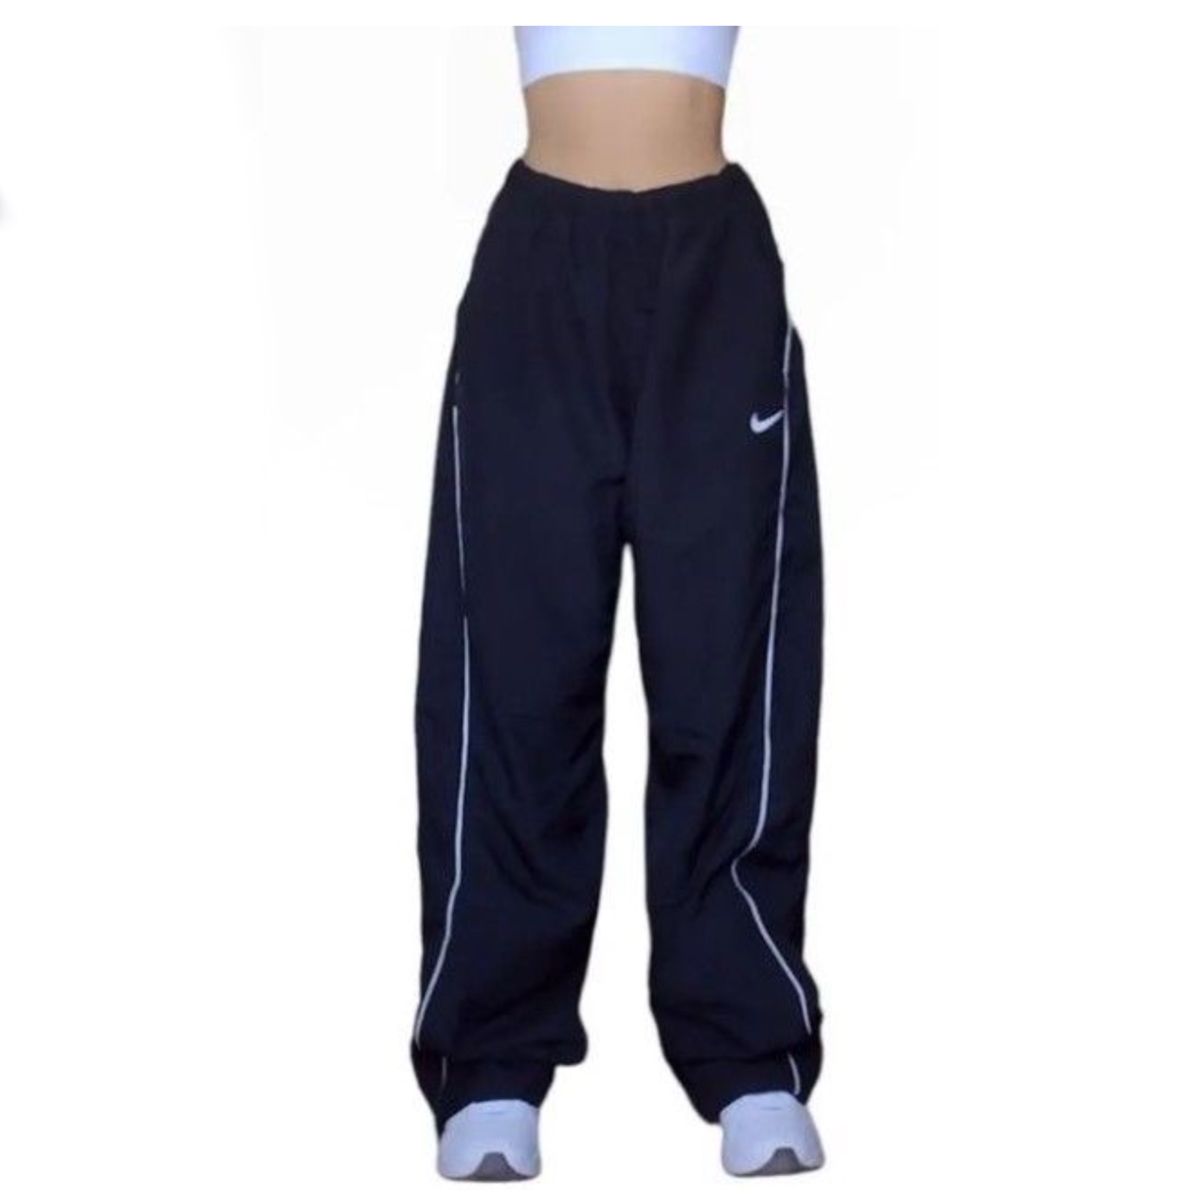 Foolproof guide on how to buy track pants